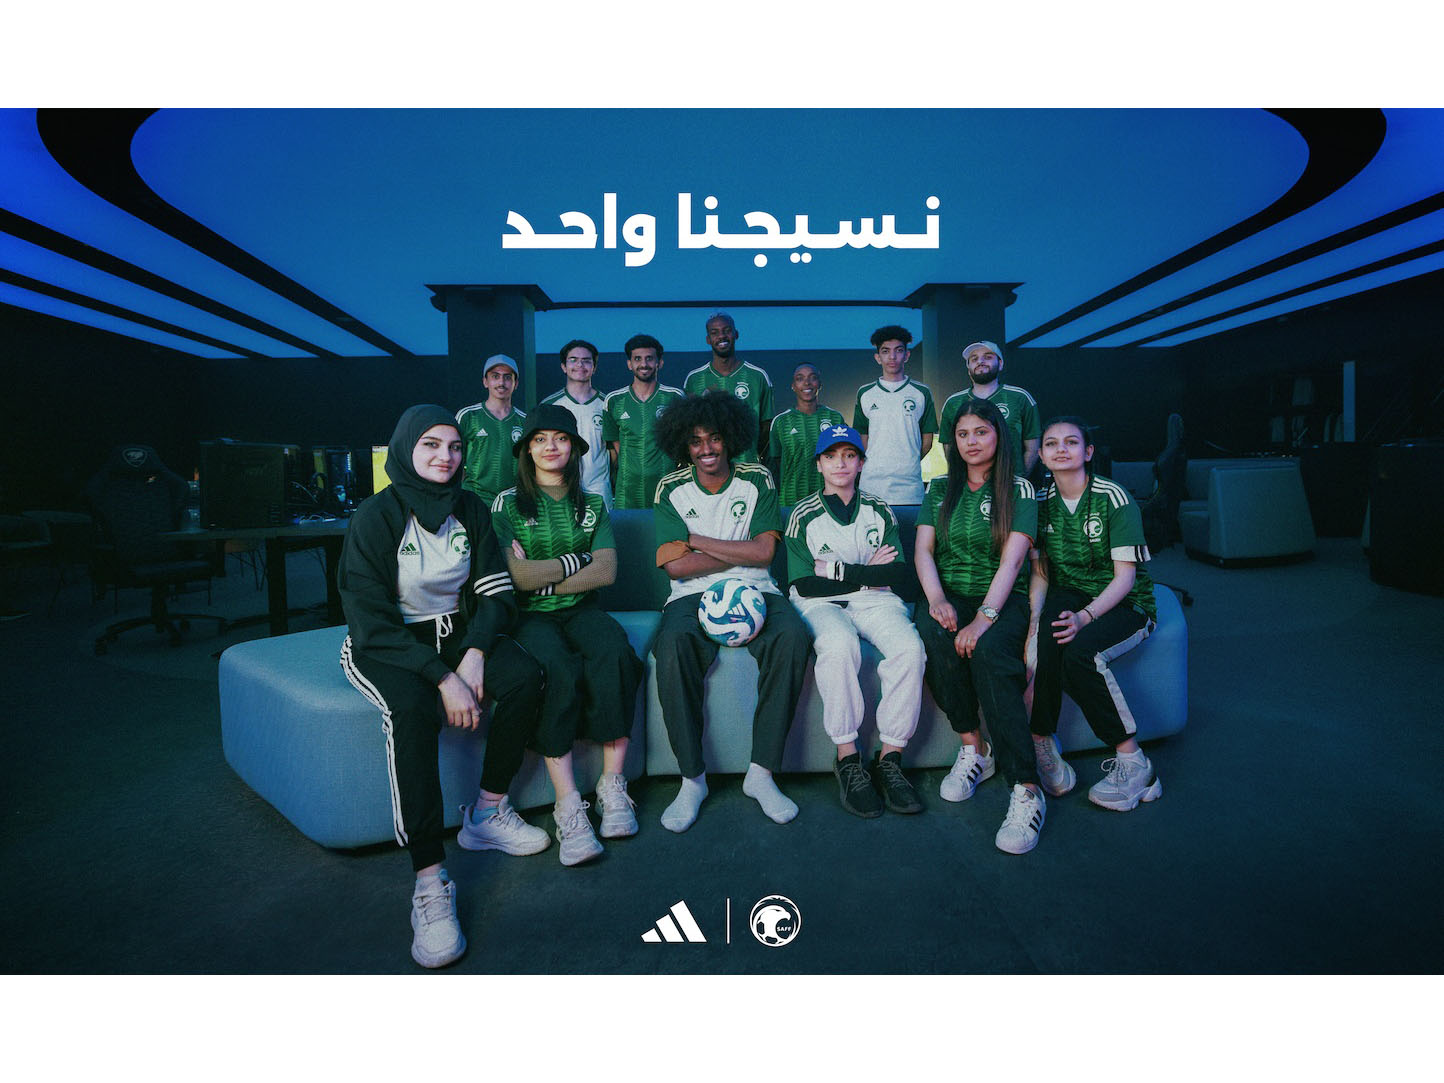 ‘Weaved as One’, adidas new campaign by Havas ME asserts that Saudi Arabia Football Federation kit belongs to all